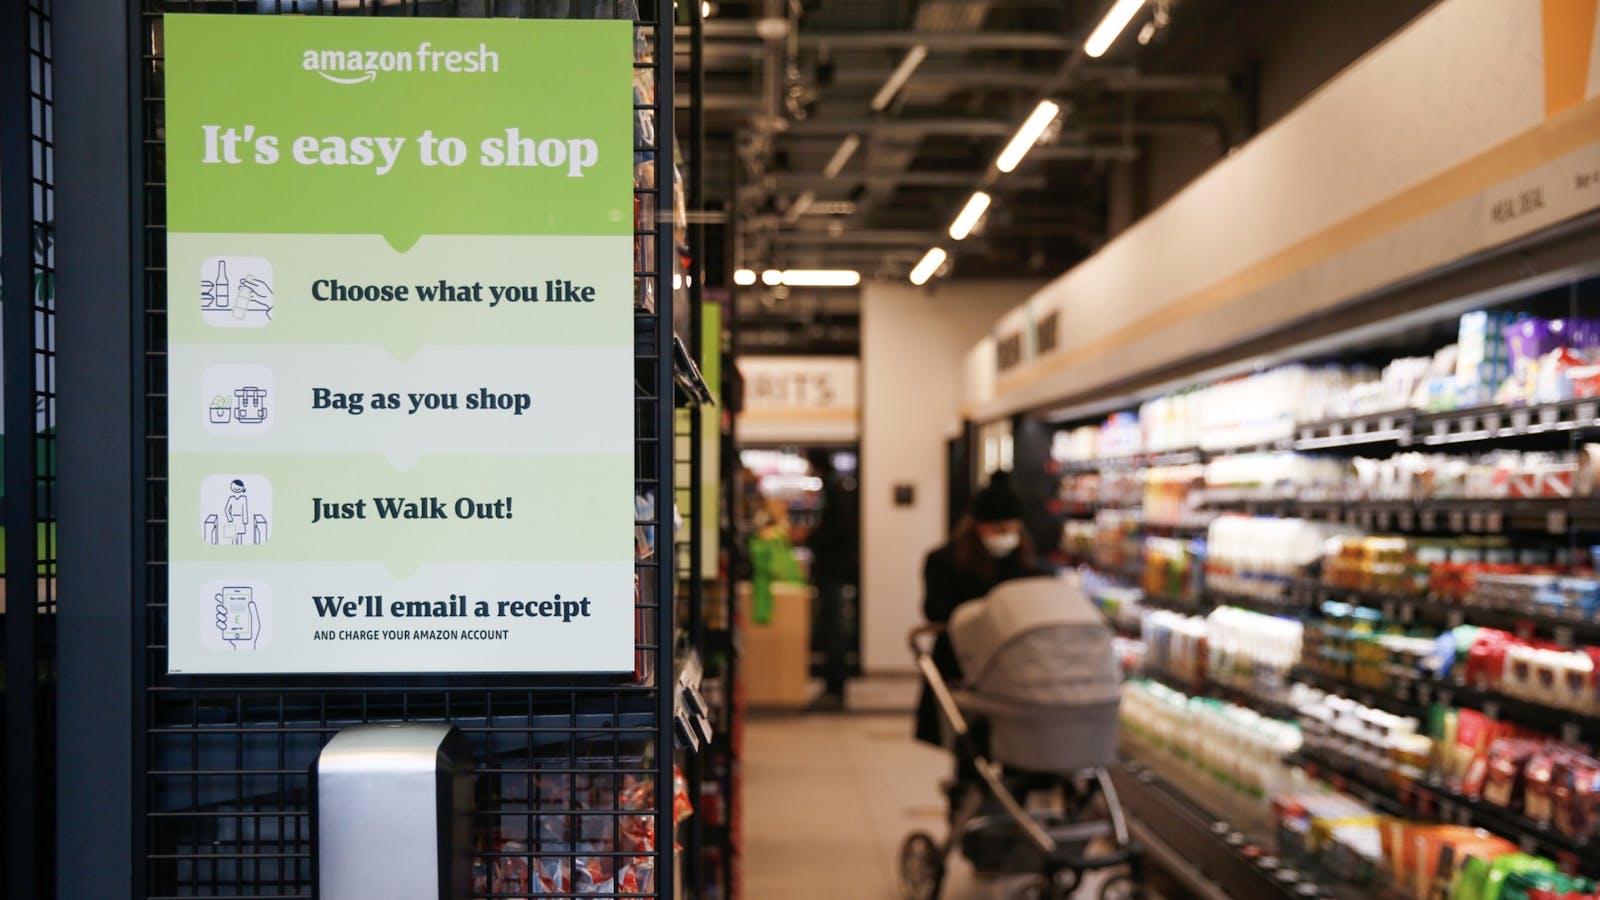 An Amazon Fresh store in London. Photo by Bloomberg.